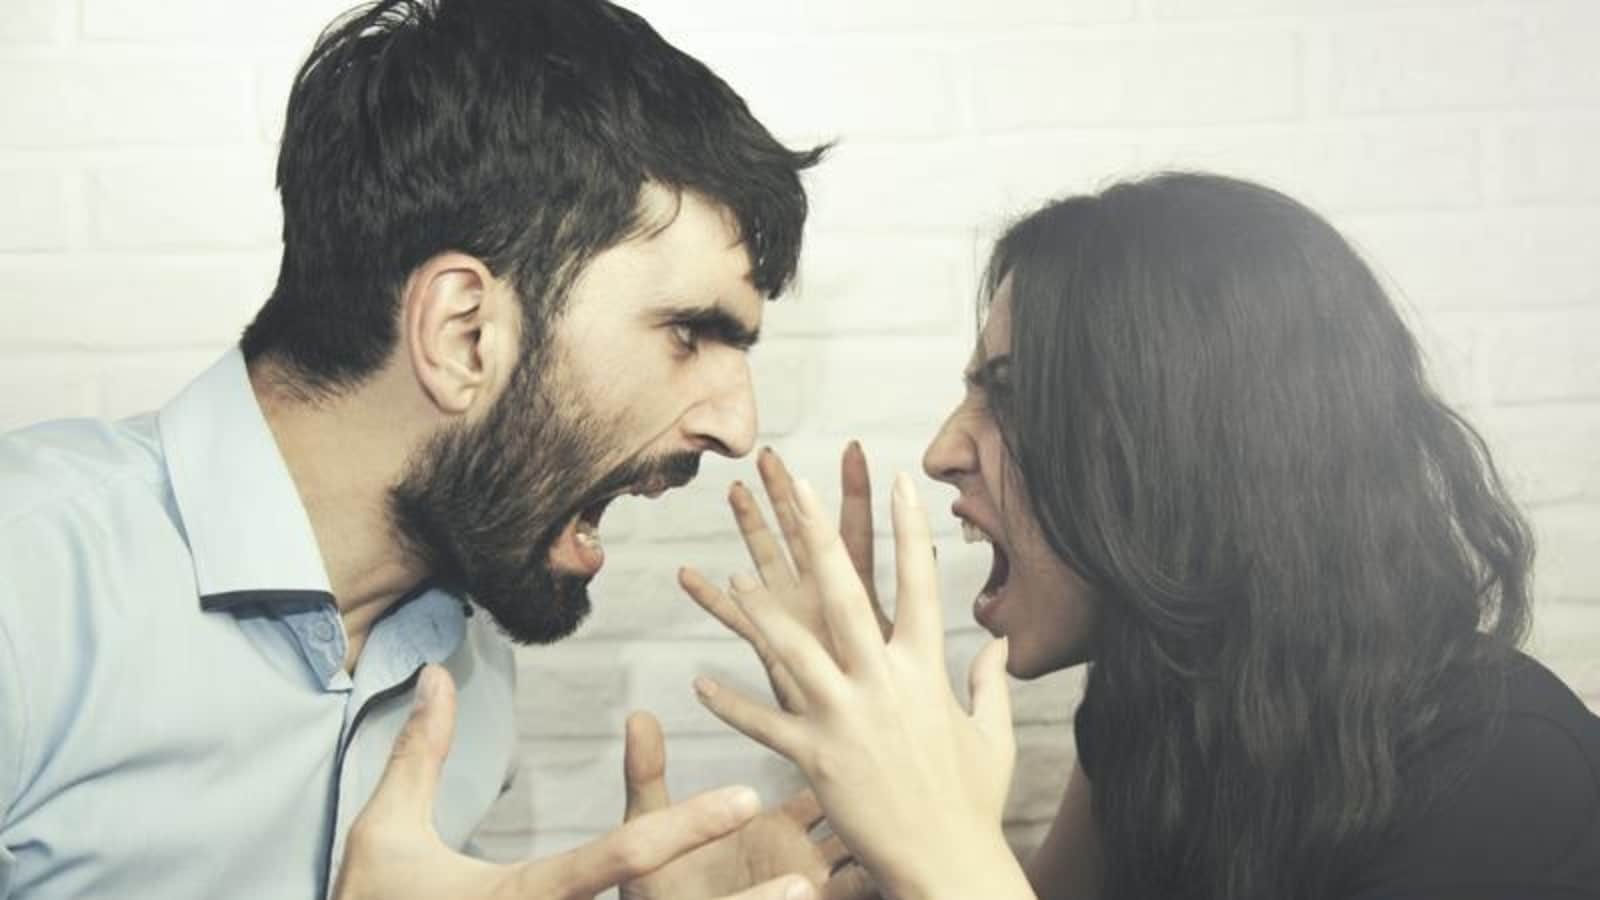 5 dating behaviours we need to stop if we want a secure relationship